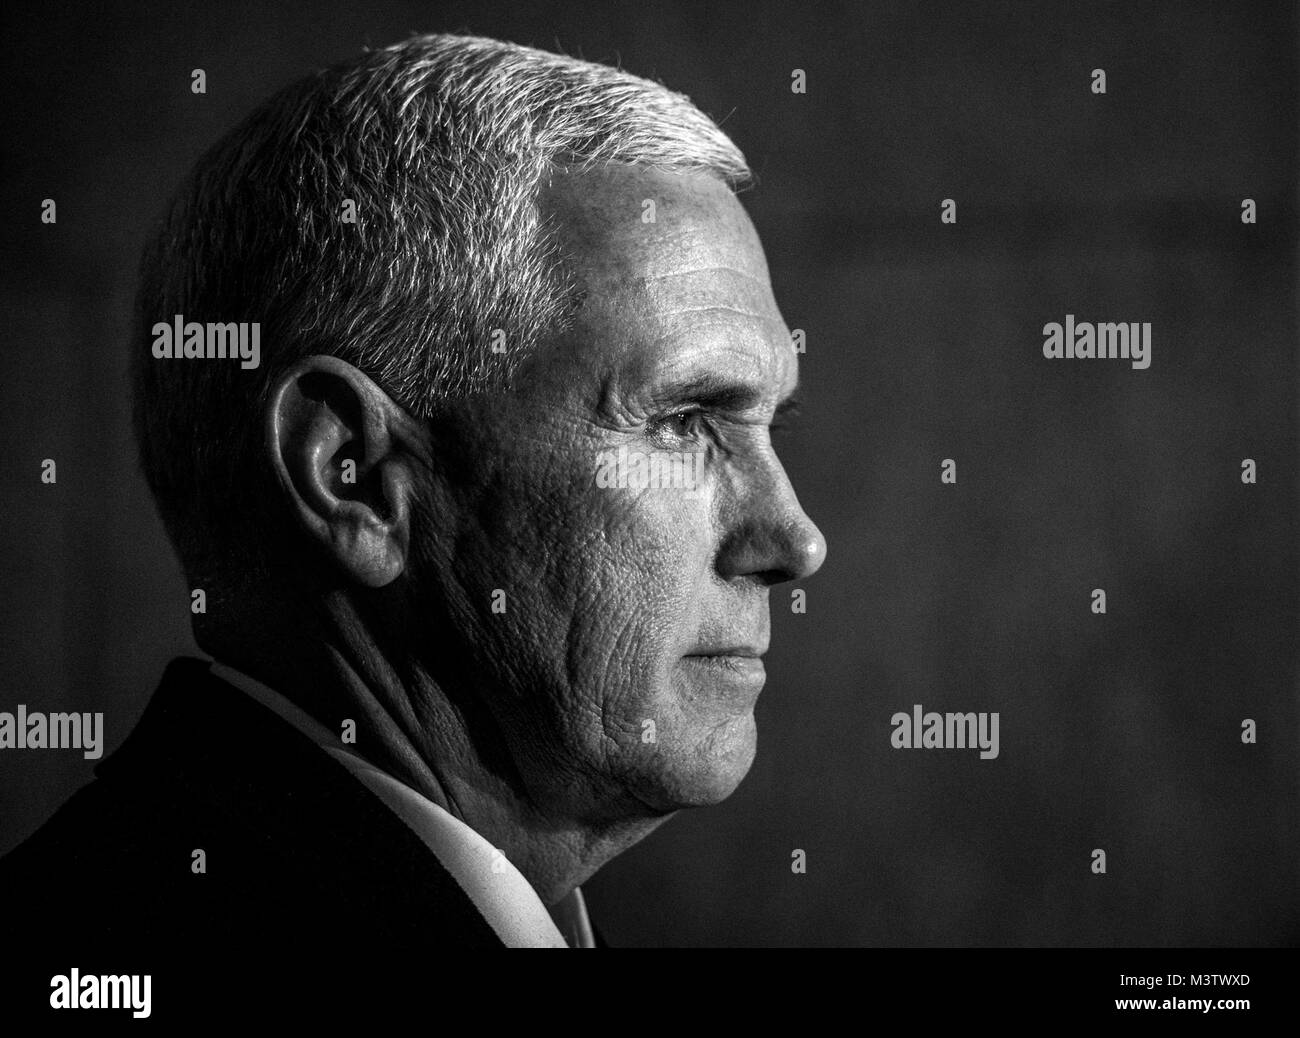 U.S. Vice President-elect Michael R. Pence waits to be announced onto the platform during the 58th Presidential Inauguration in Washington, D.C., Jan. 20, 2017. More than 5,000 military members from across all branches of the armed forces of the United States, including reserve and National Guard components, provided ceremonial support and Defense Support of Civil Authorities during the inaugural period. (DoD photo by U.S. Air Force Staff Sgt. Marianique Santos) 170120-D-NA975-0634 by AirmanMagazine Stock Photo